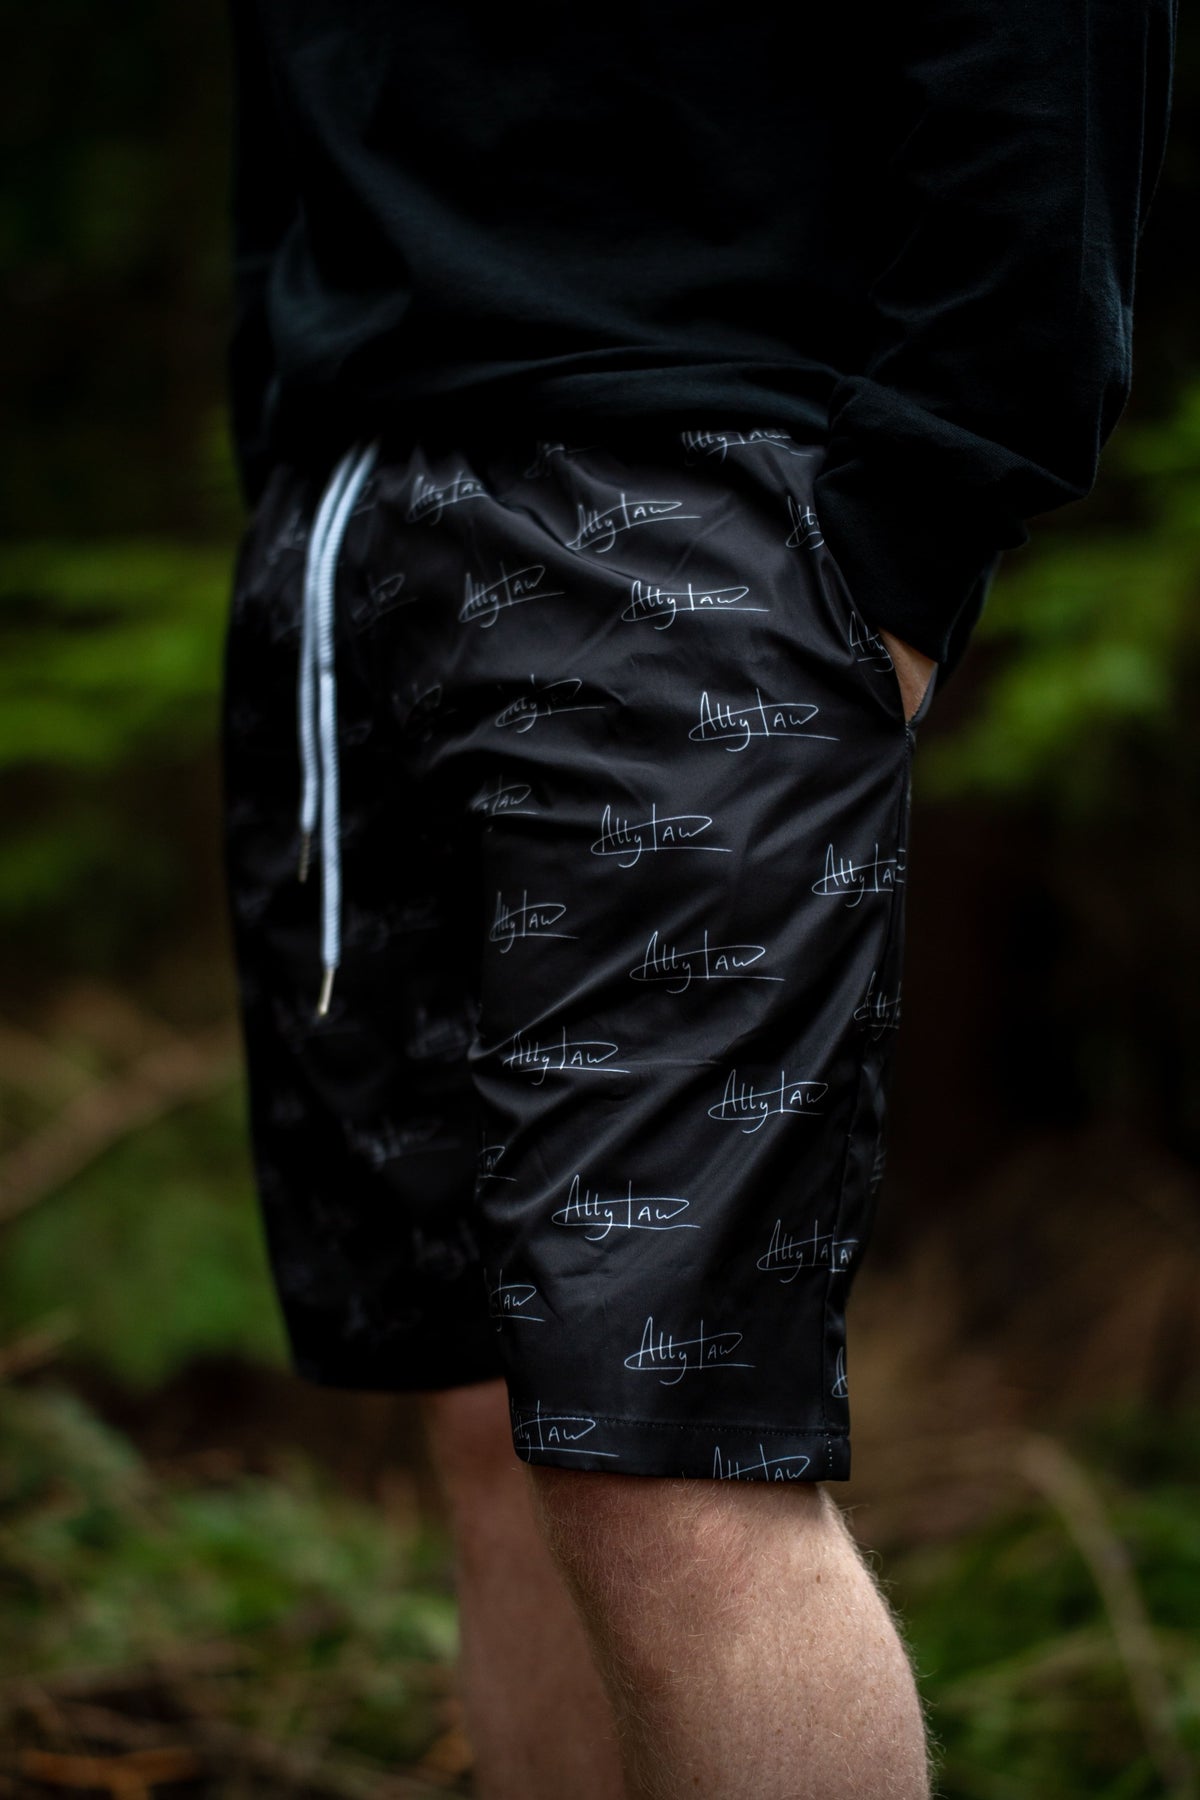 Ally Law Signature shorts